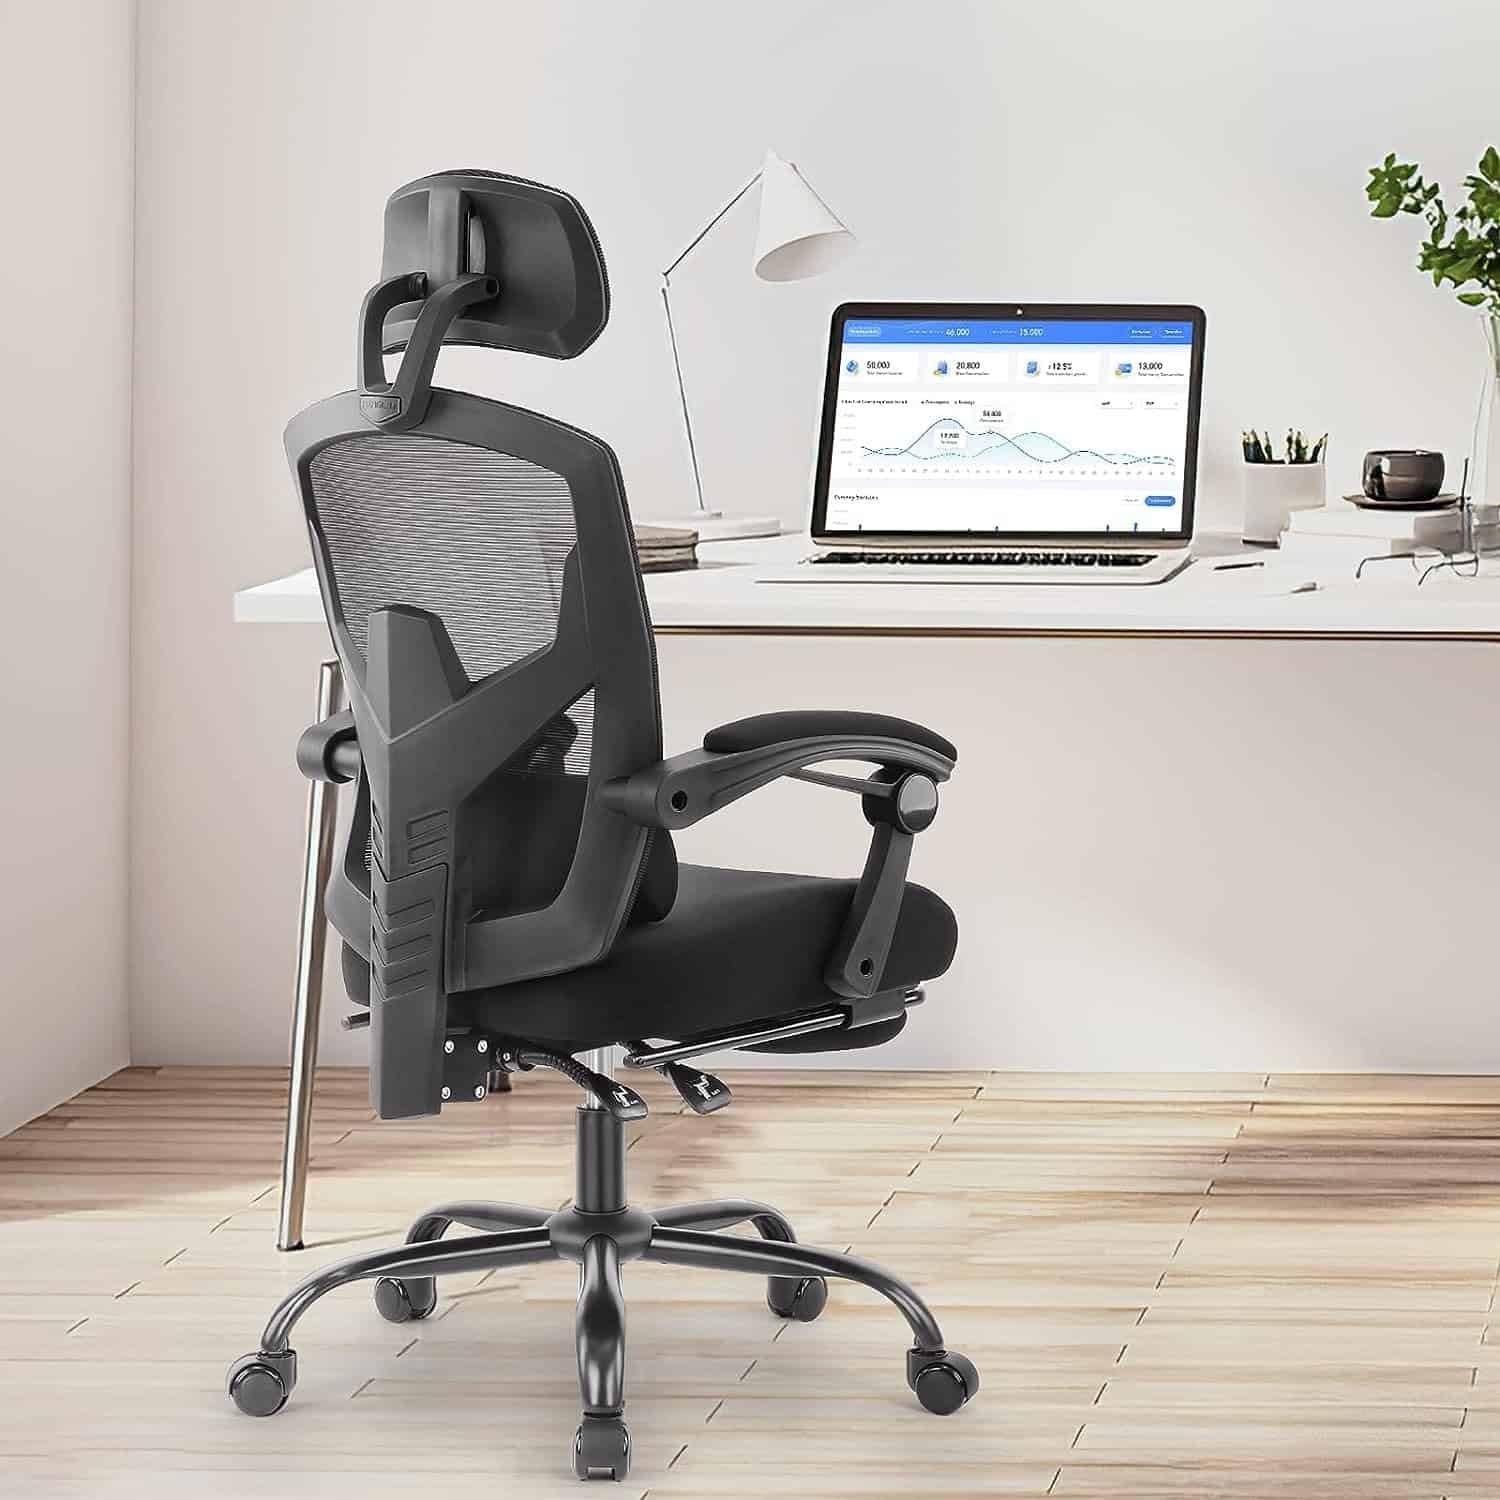 Ergonomic Office Chair Review